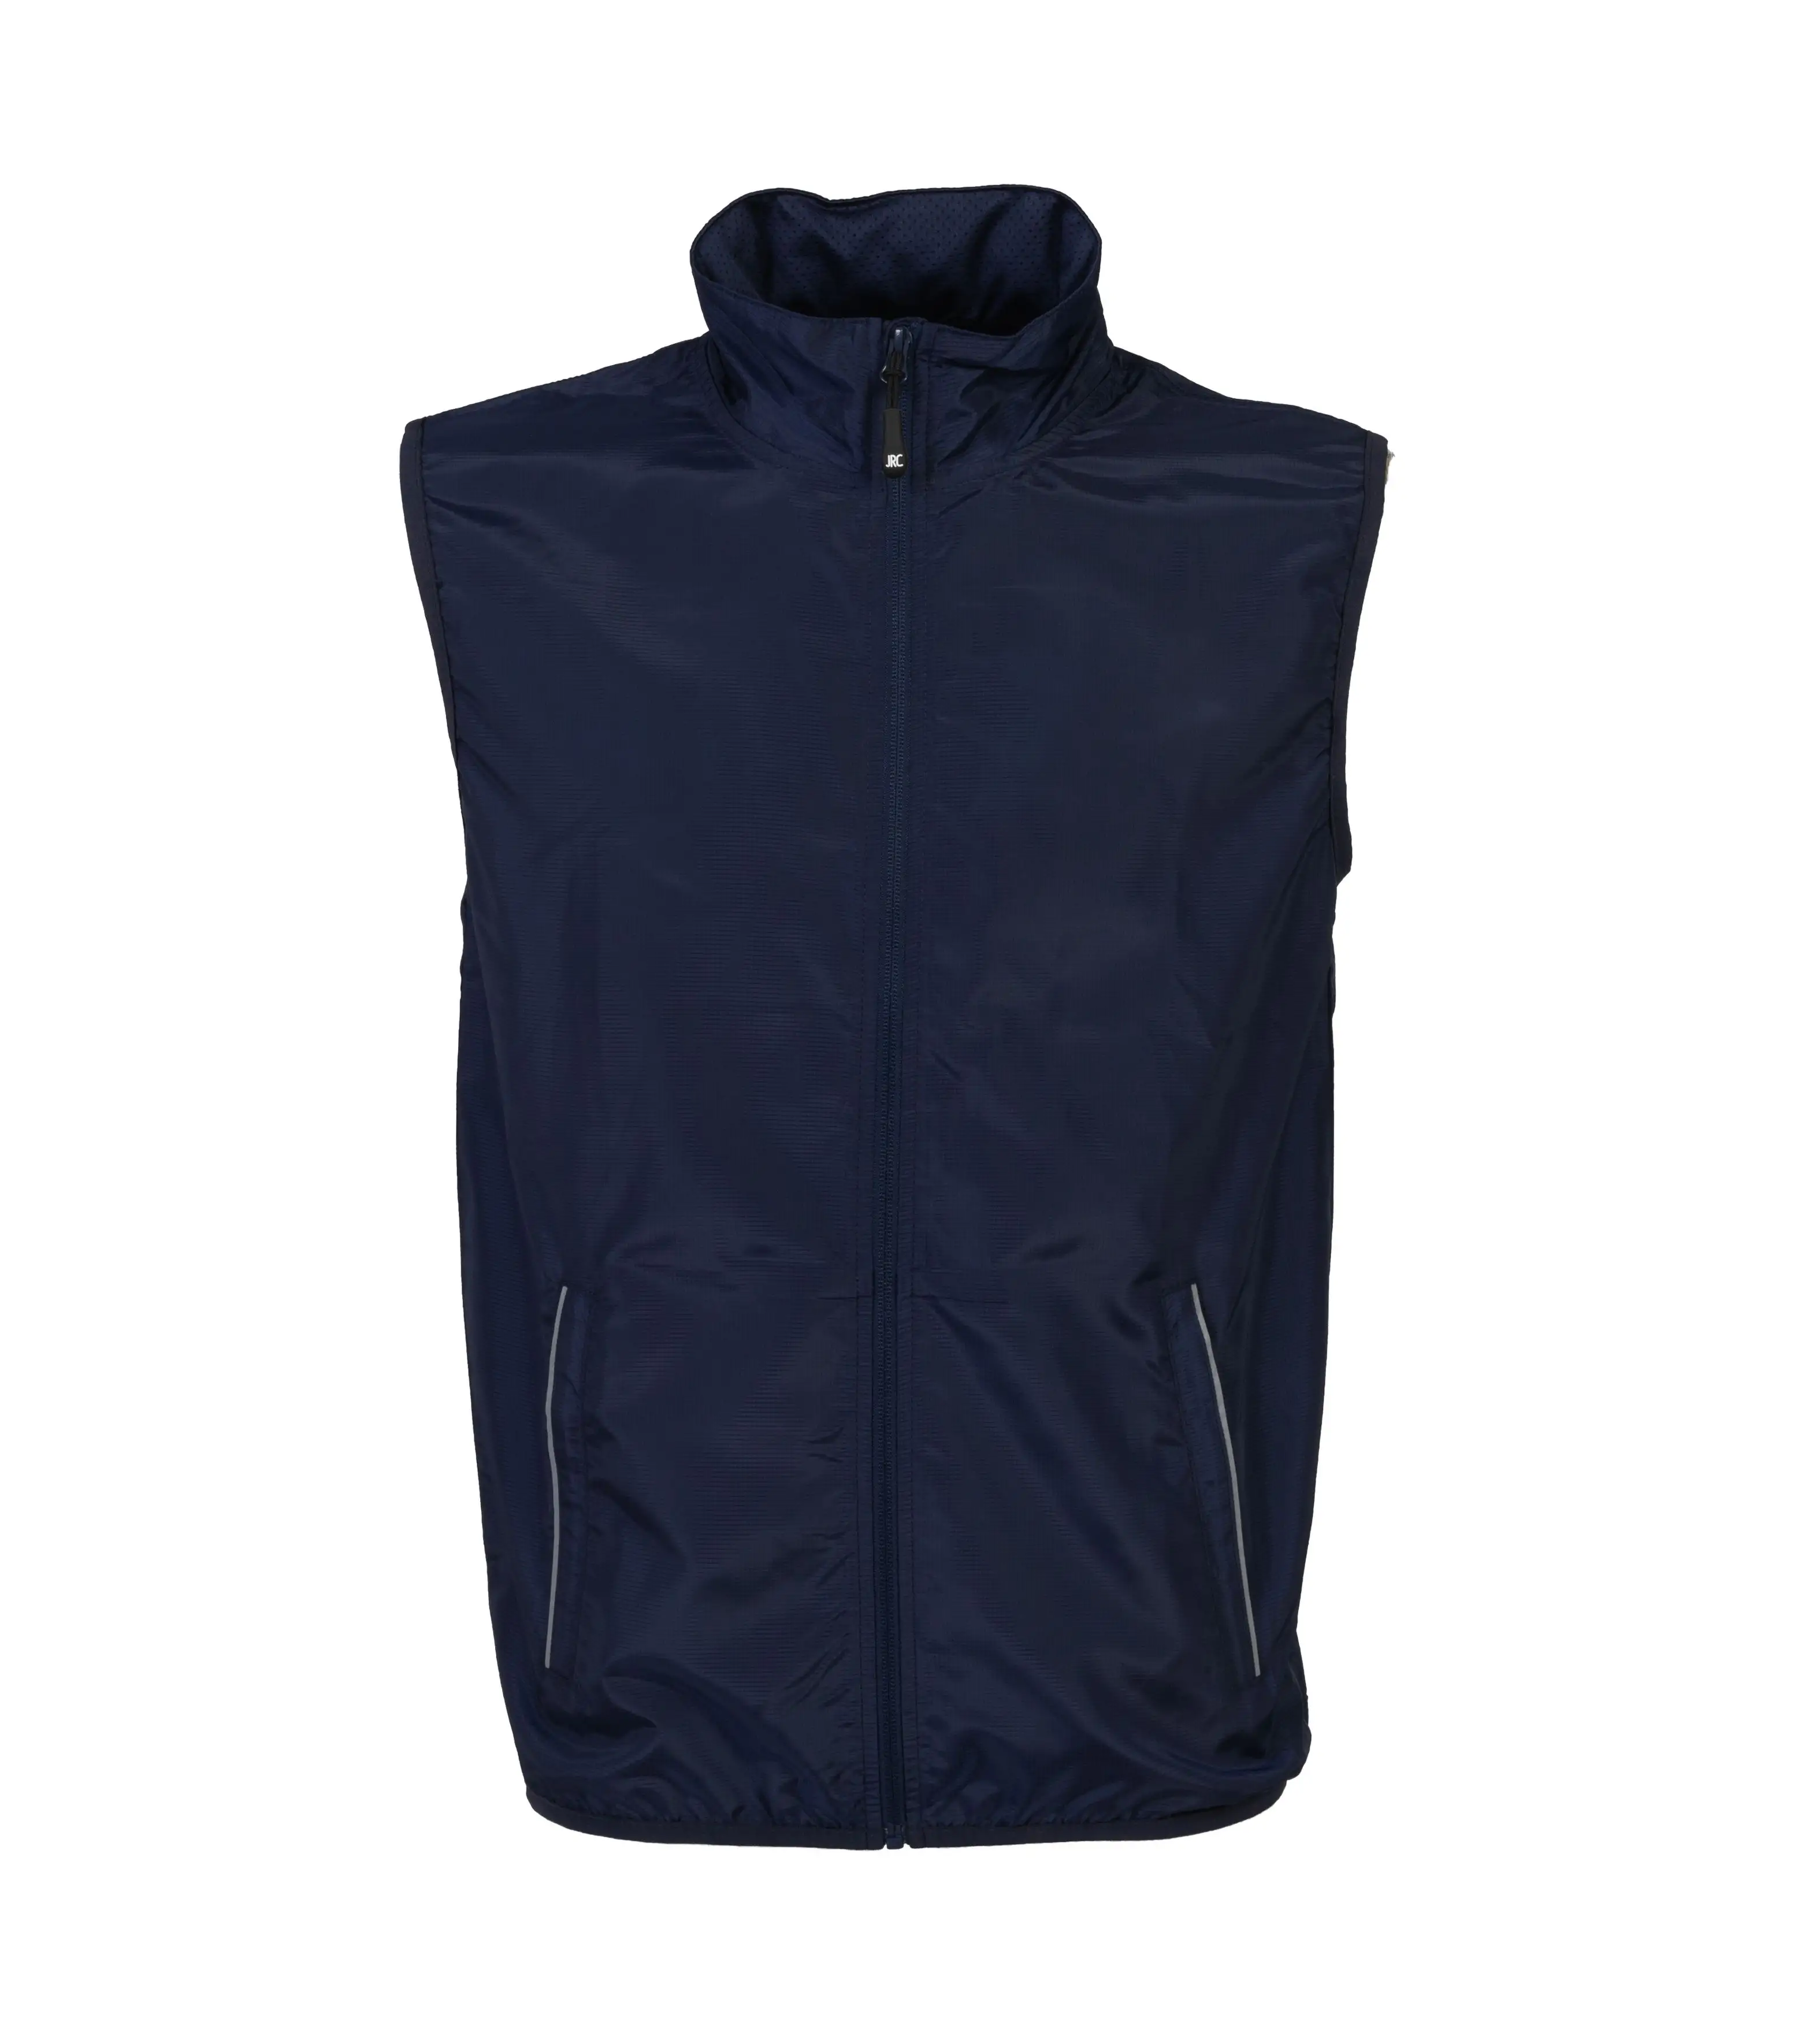 Gilet fiume man - yellow fluo - s